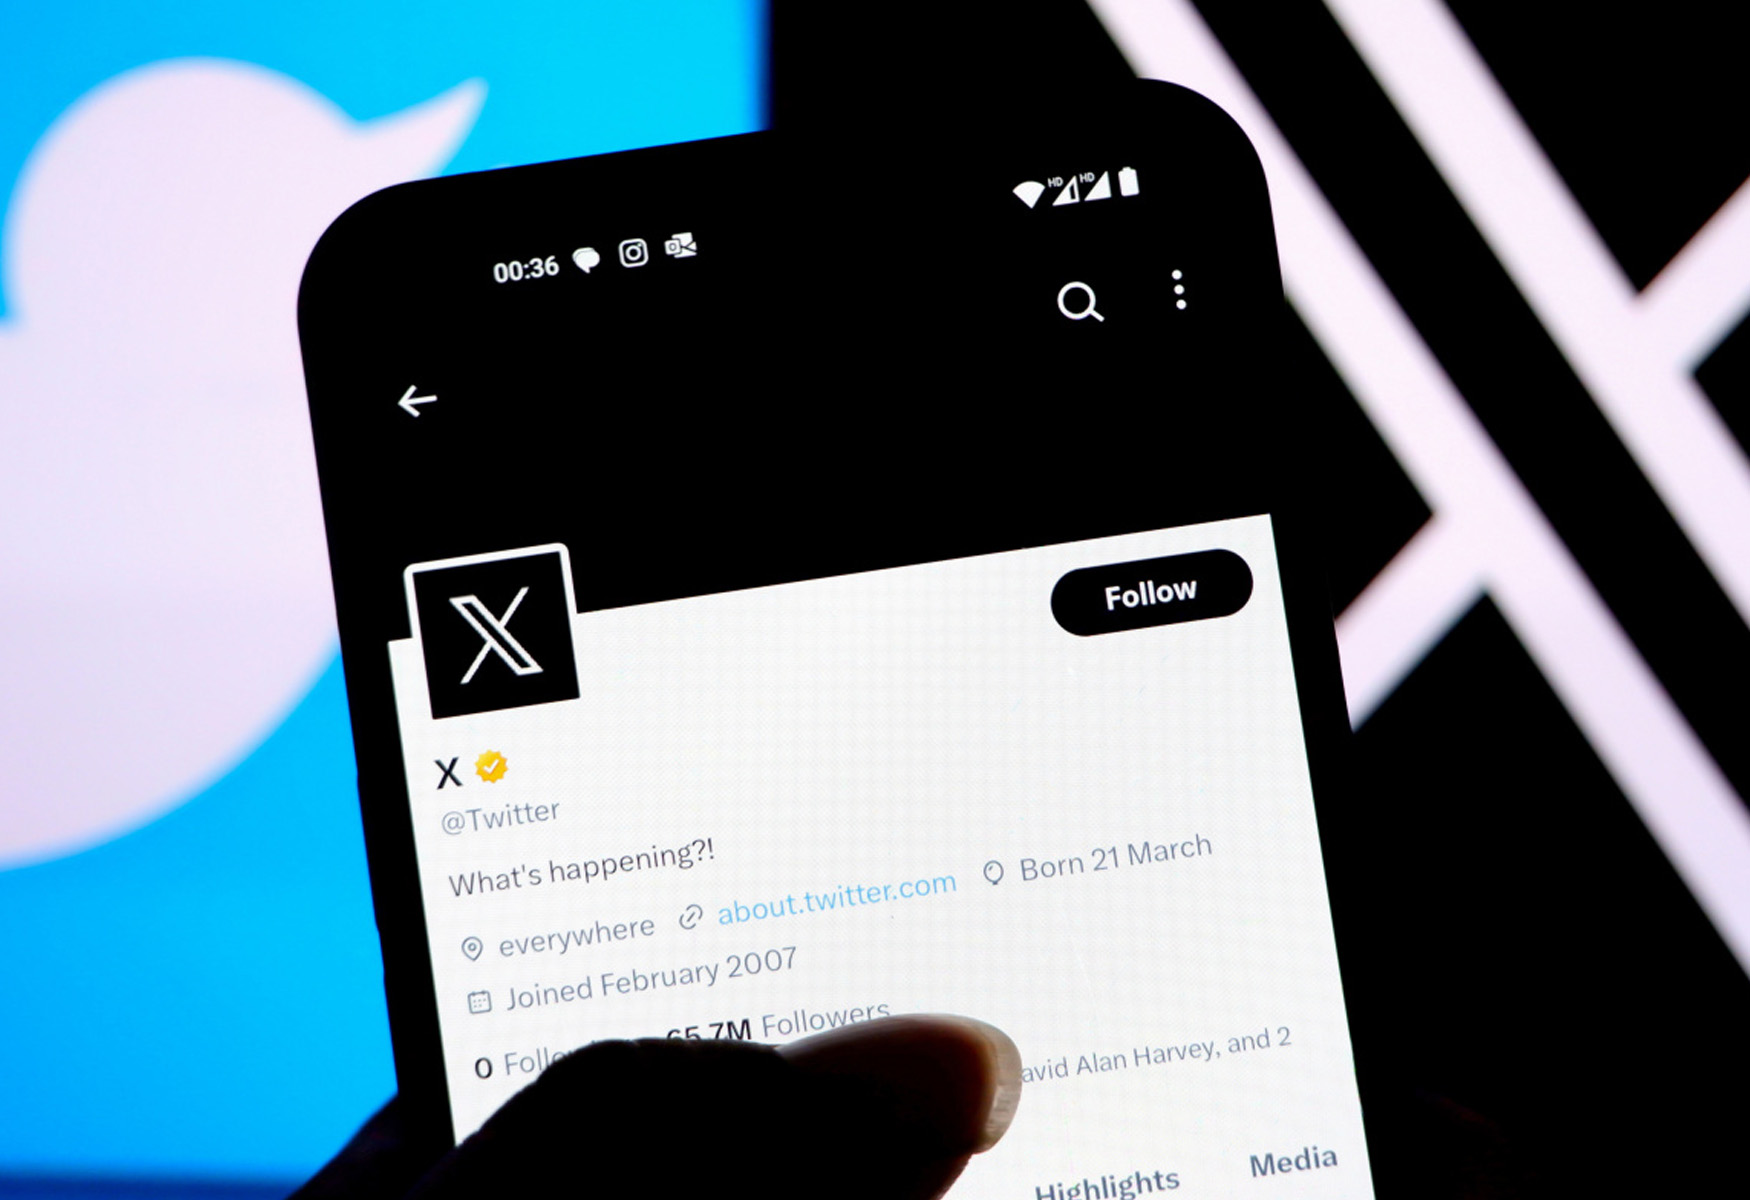 x-introduces-new-control-to-restrict-replies-to-verified-accounts